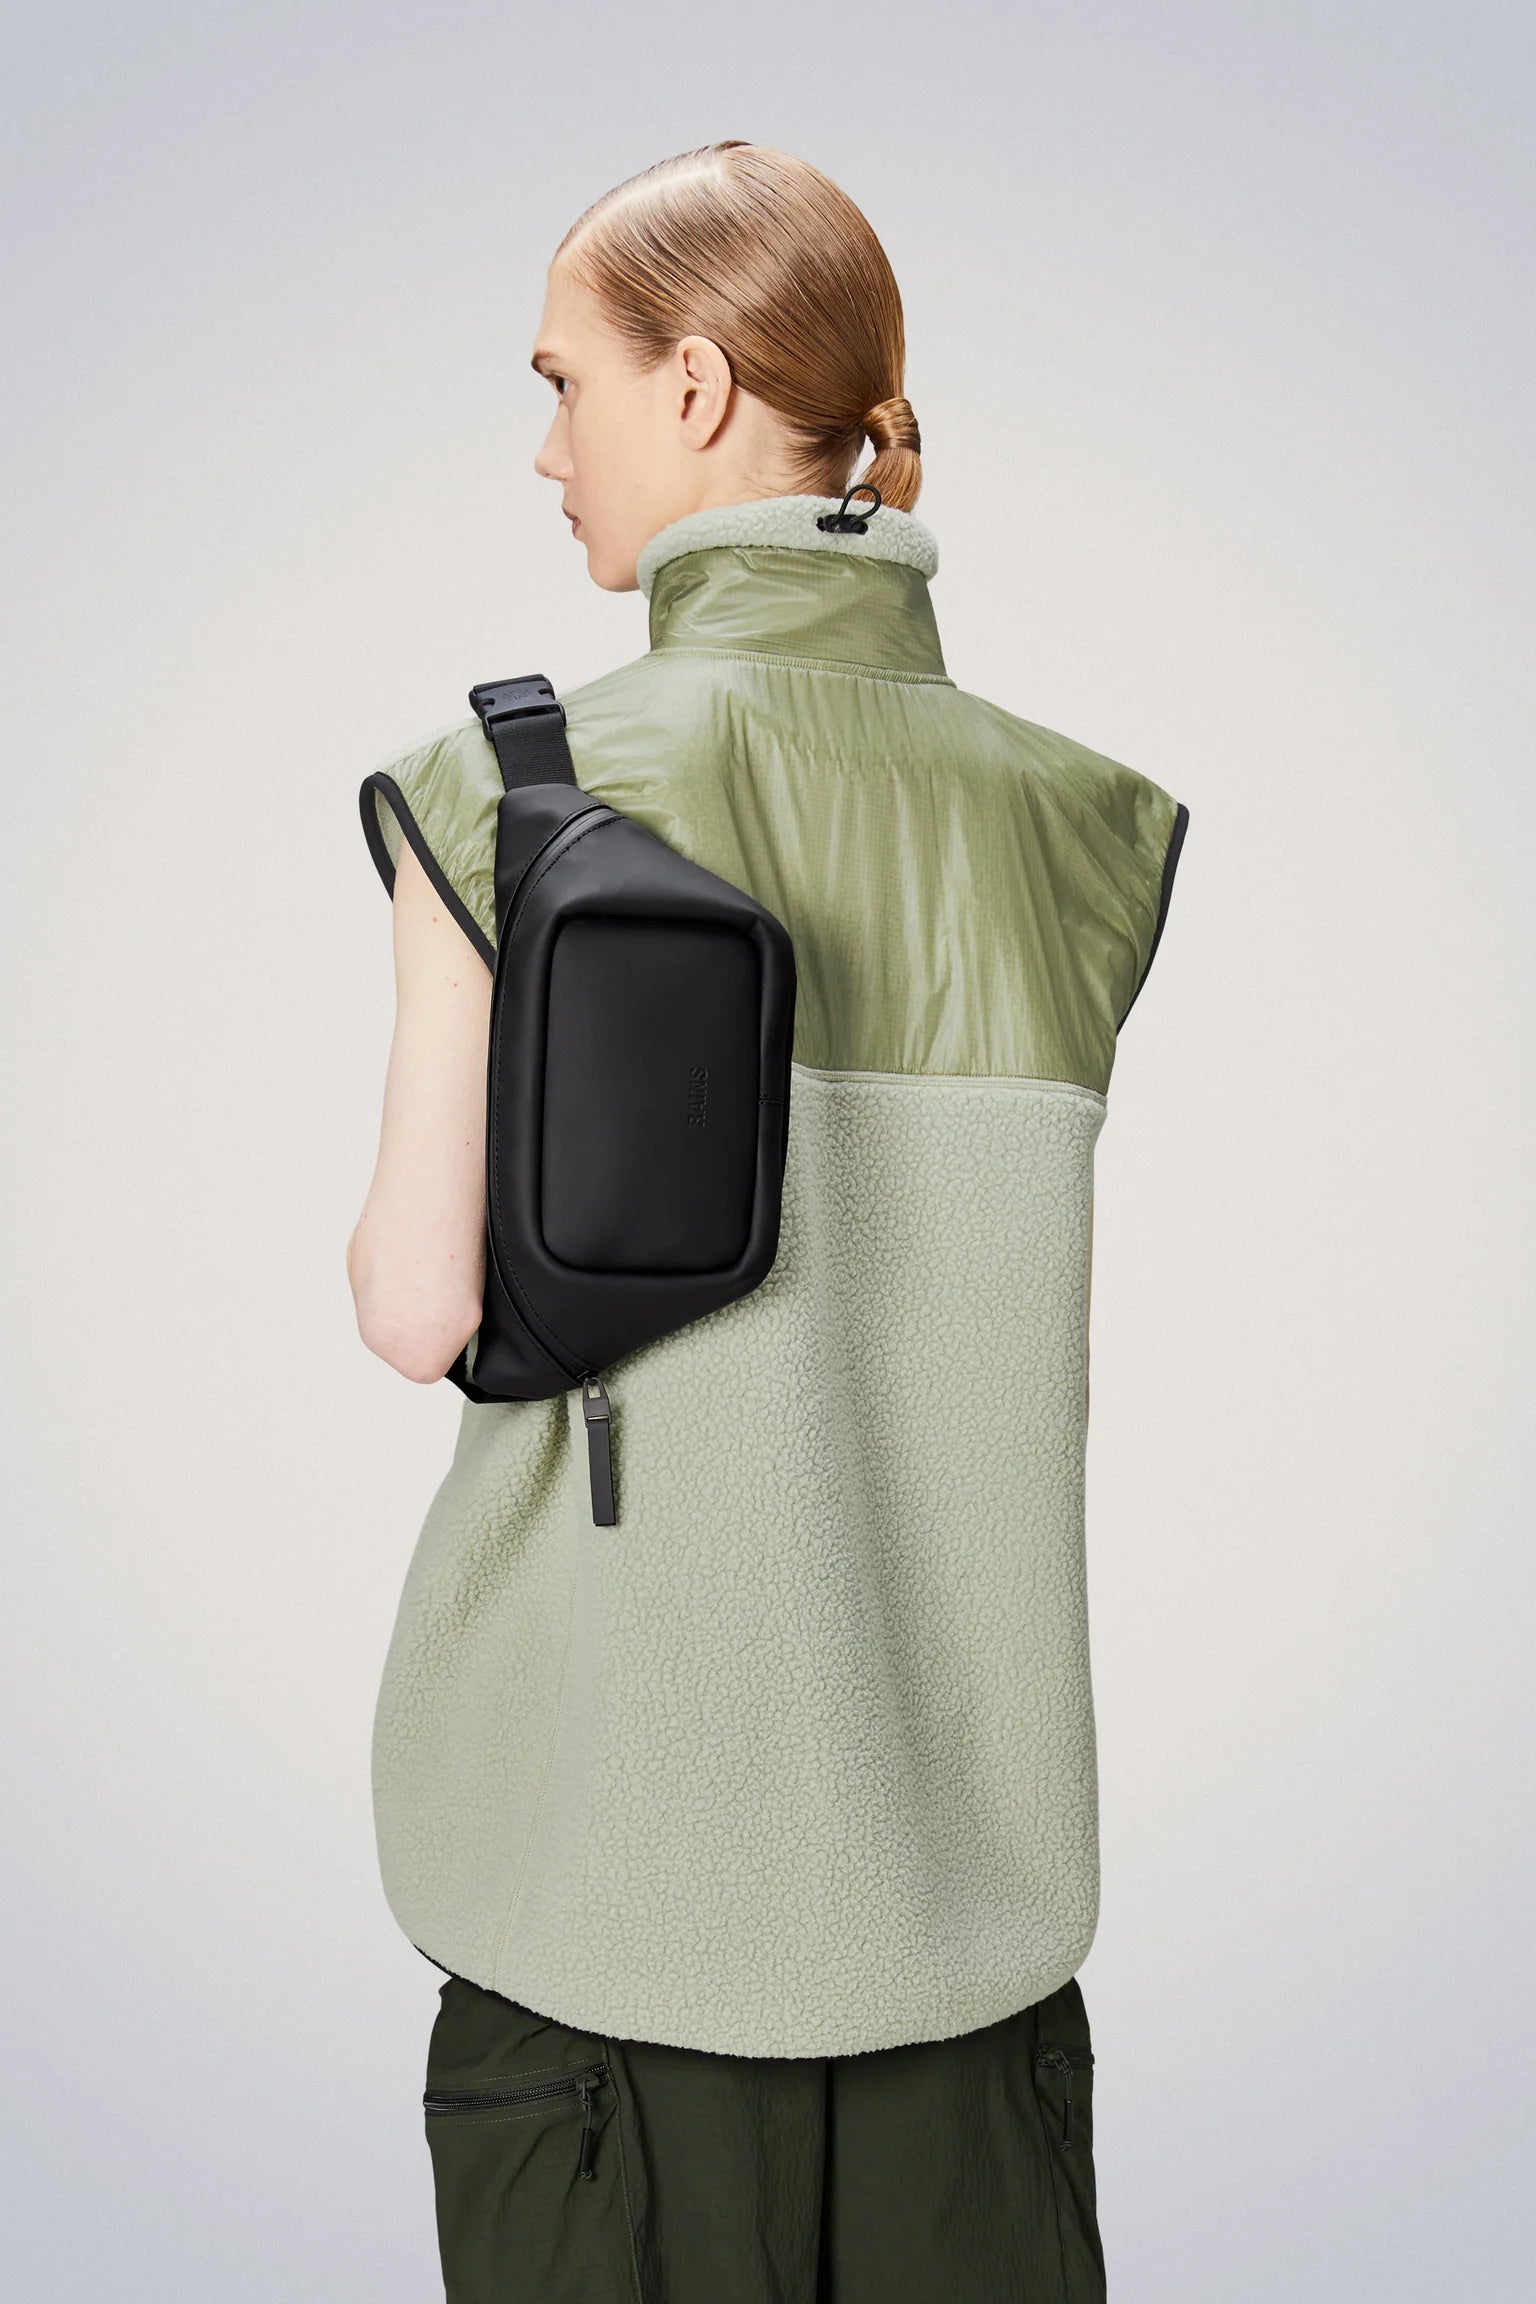 The waterproof Rains Bum Bag Mini, worn on the back of a woman, features an adjustable webbing strap complemented by a green vest.